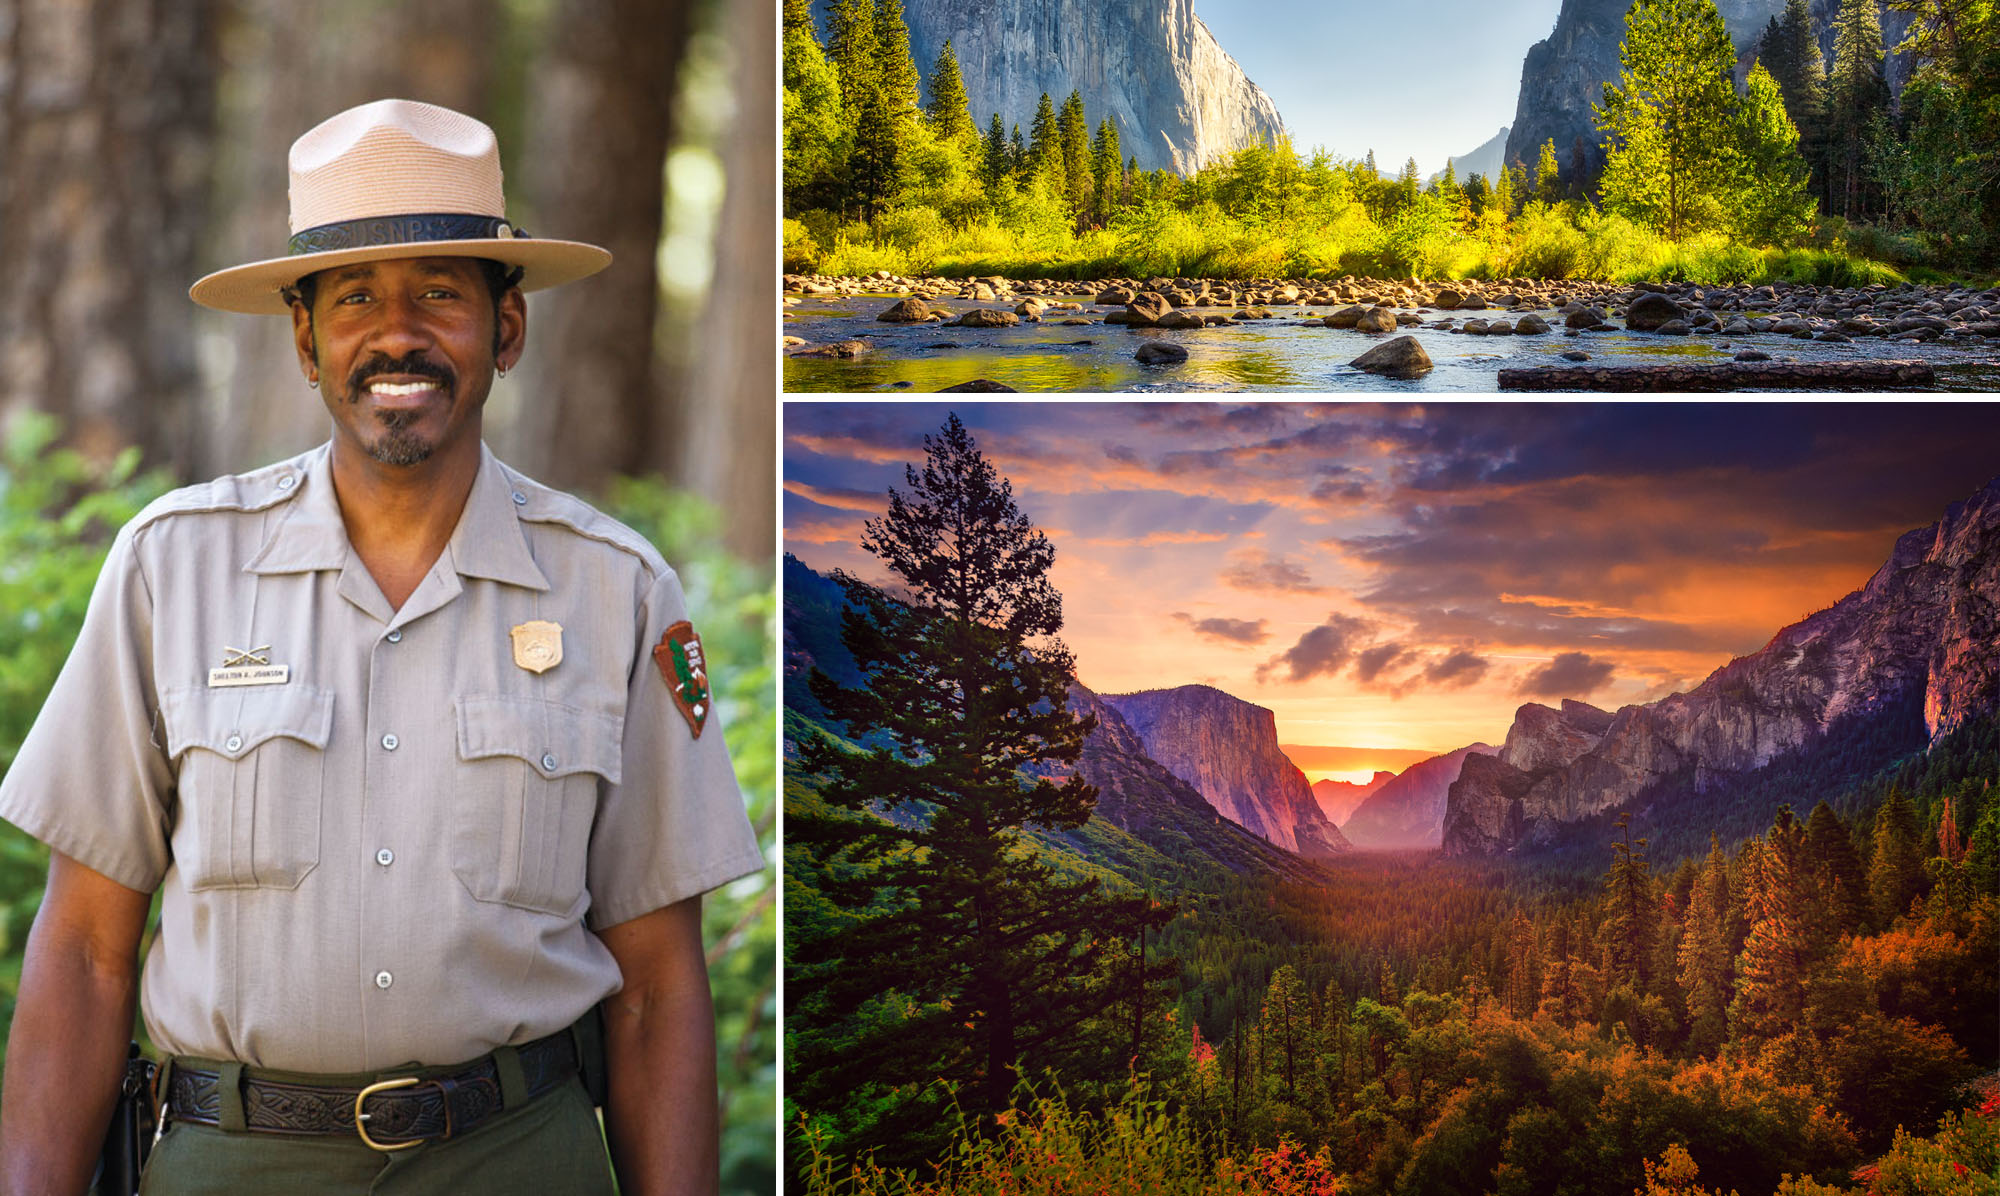 This Ranger Thinks More Black Folks Need To Visit National Parks